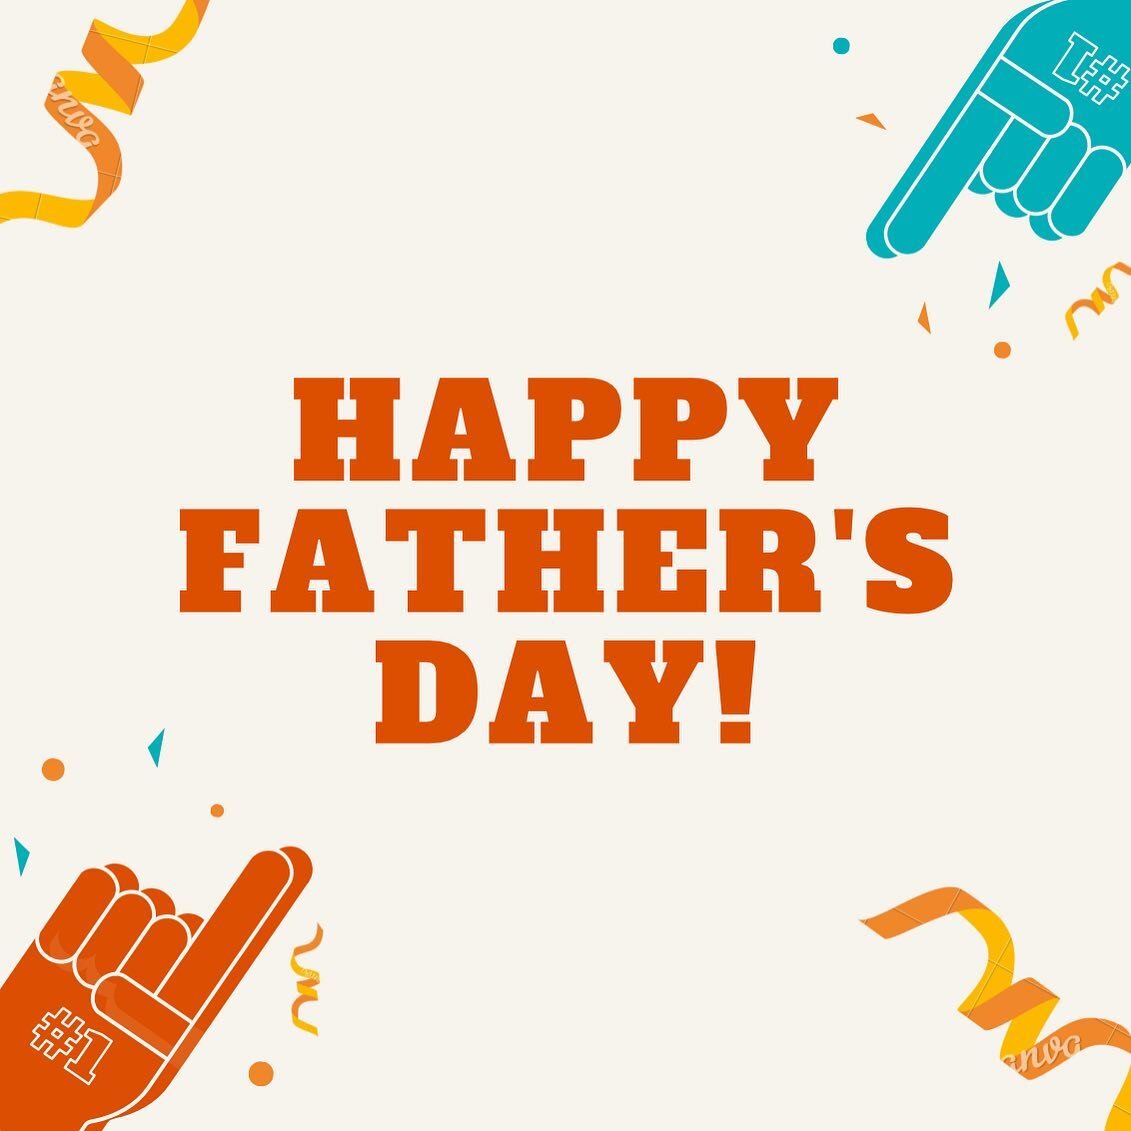 Happy Father&rsquo;s Day to all the dads and father figures out there. Wishing you an awesome day.